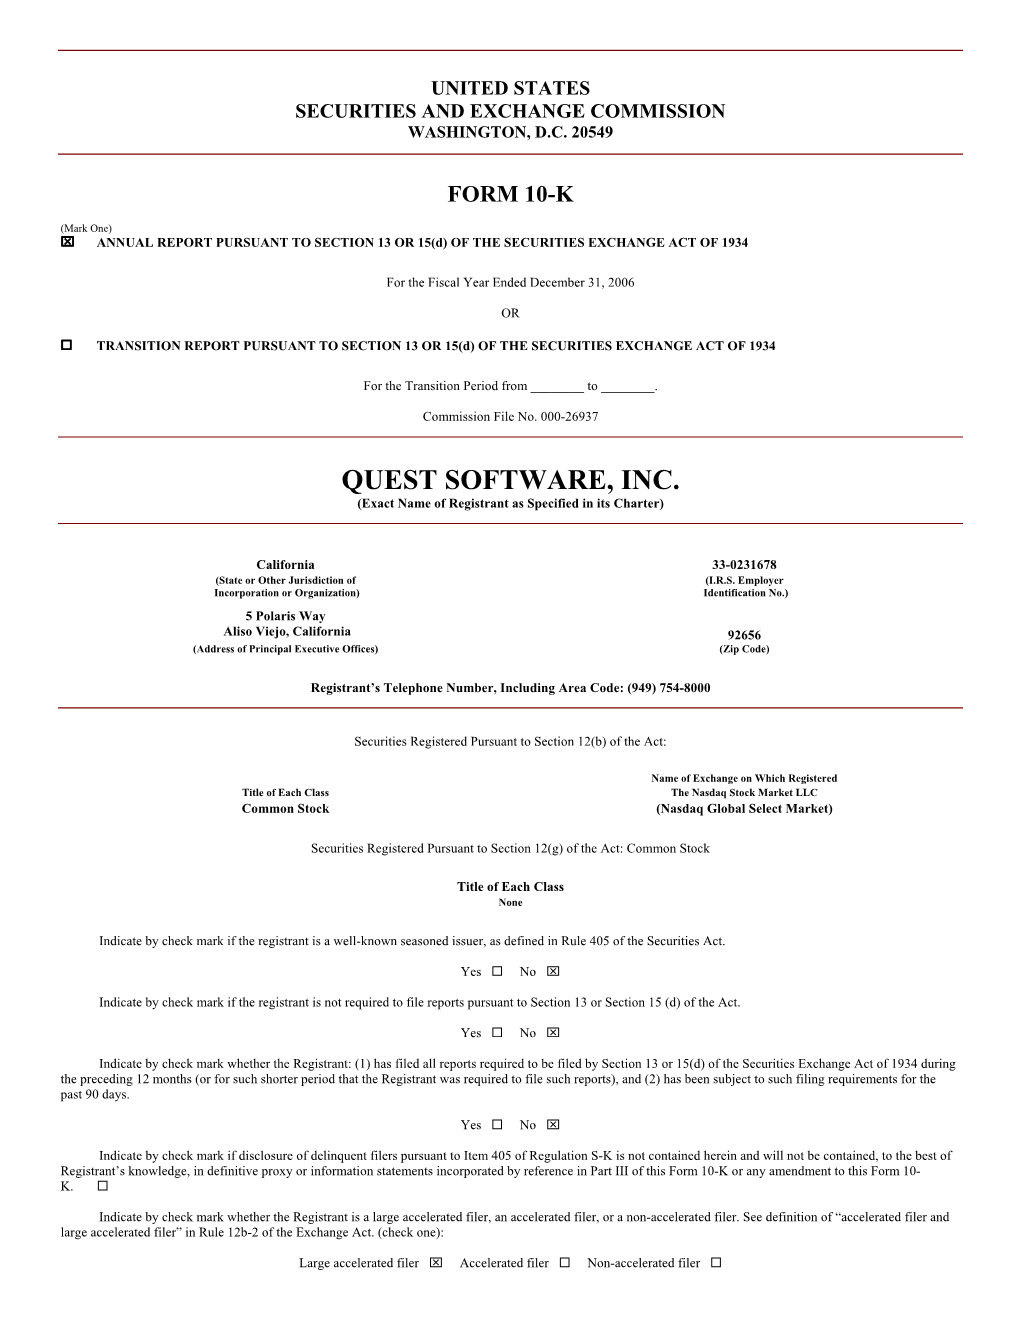 QUEST SOFTWARE, INC. (Exact Name of Registrant As Specified in Its Charter)